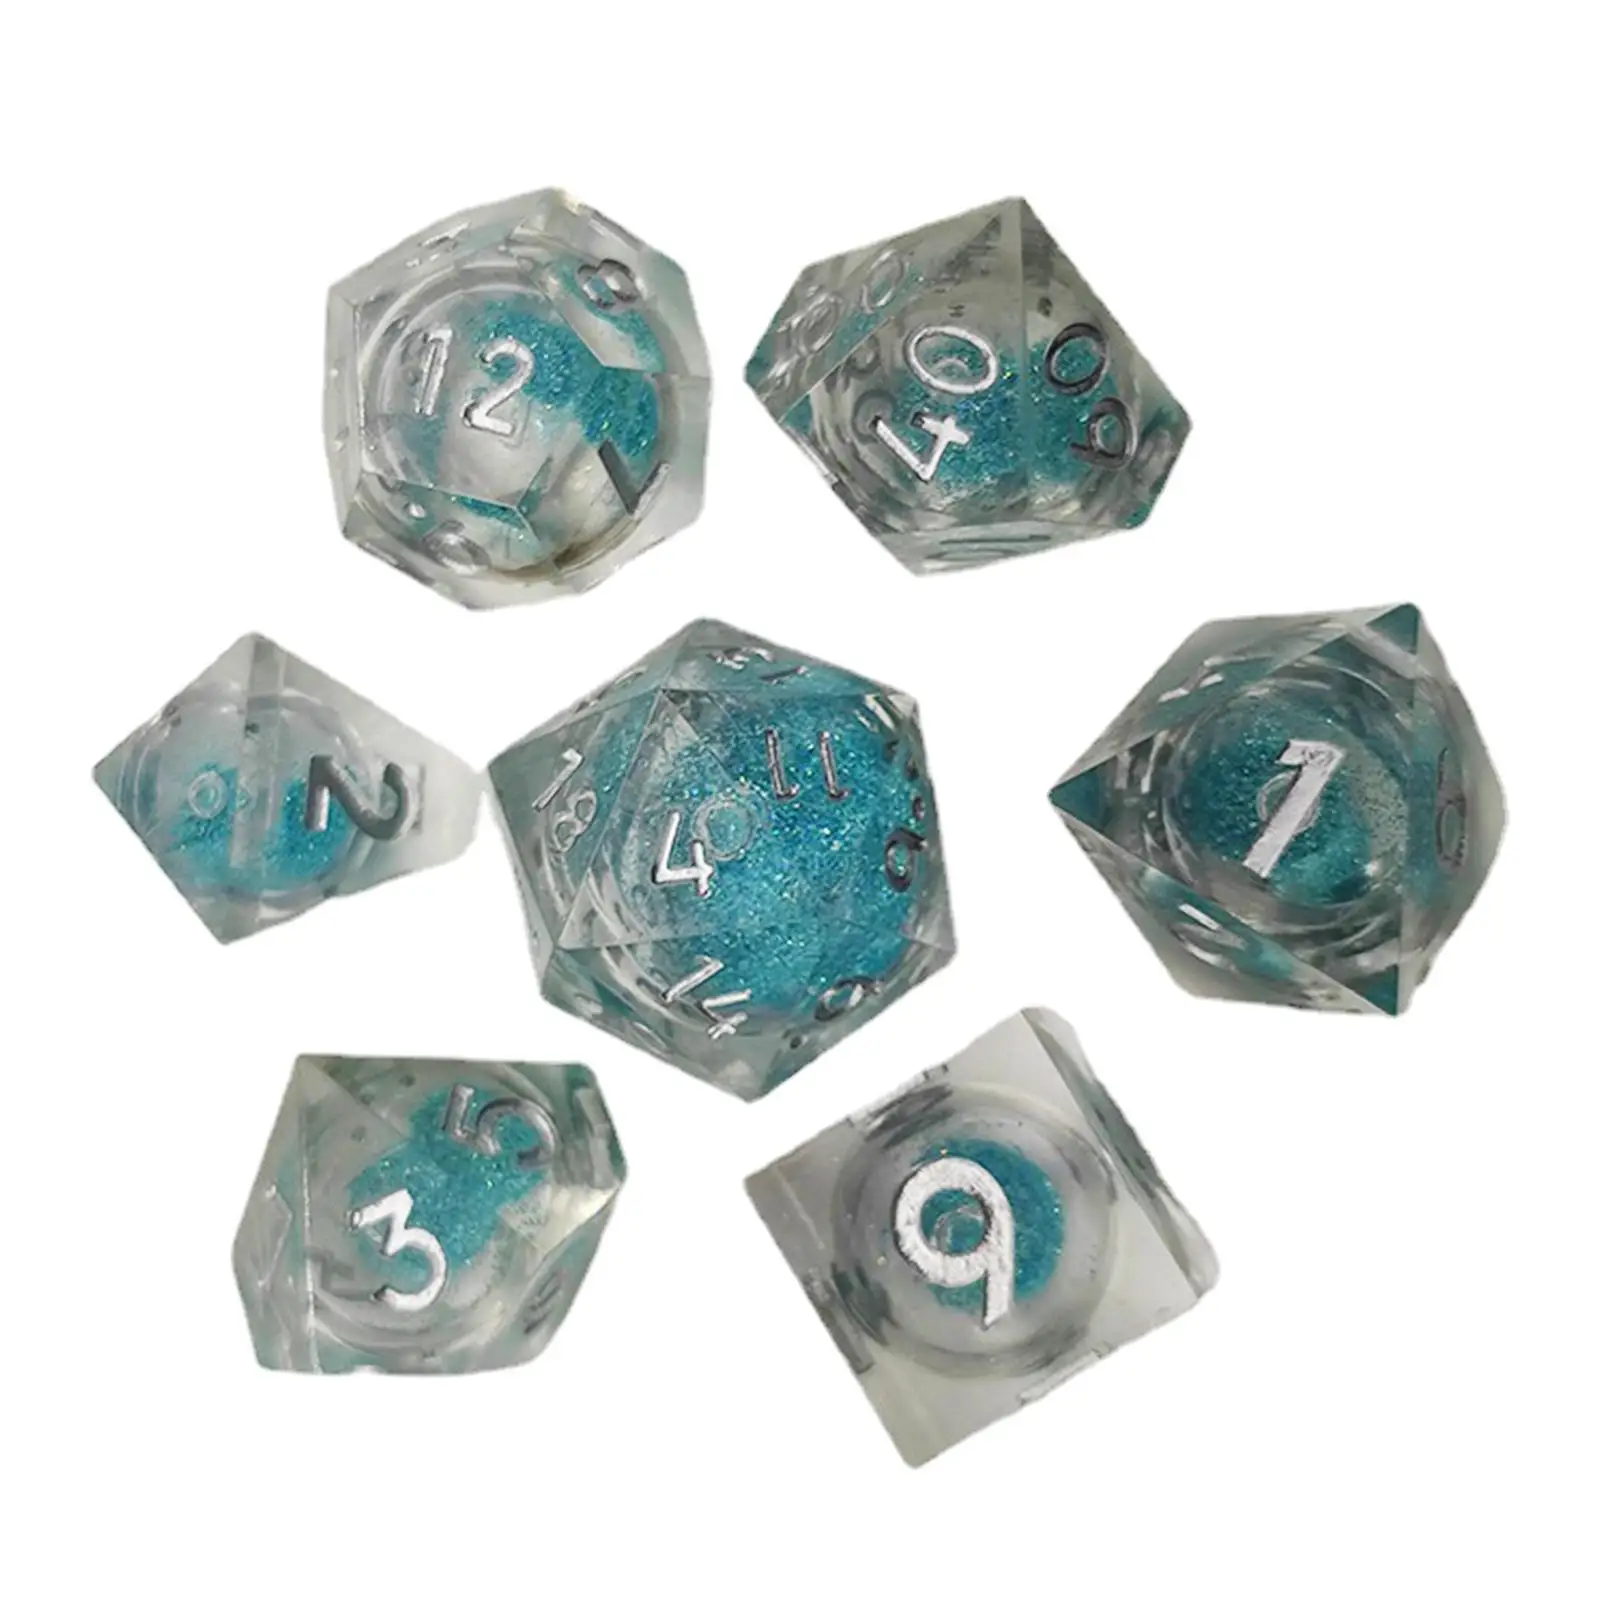 7pcs Translucent Multi Sided Dice Play Gaming Dice Digital Dices Set for Table Game Teaching Prop Entertainment Role Playing